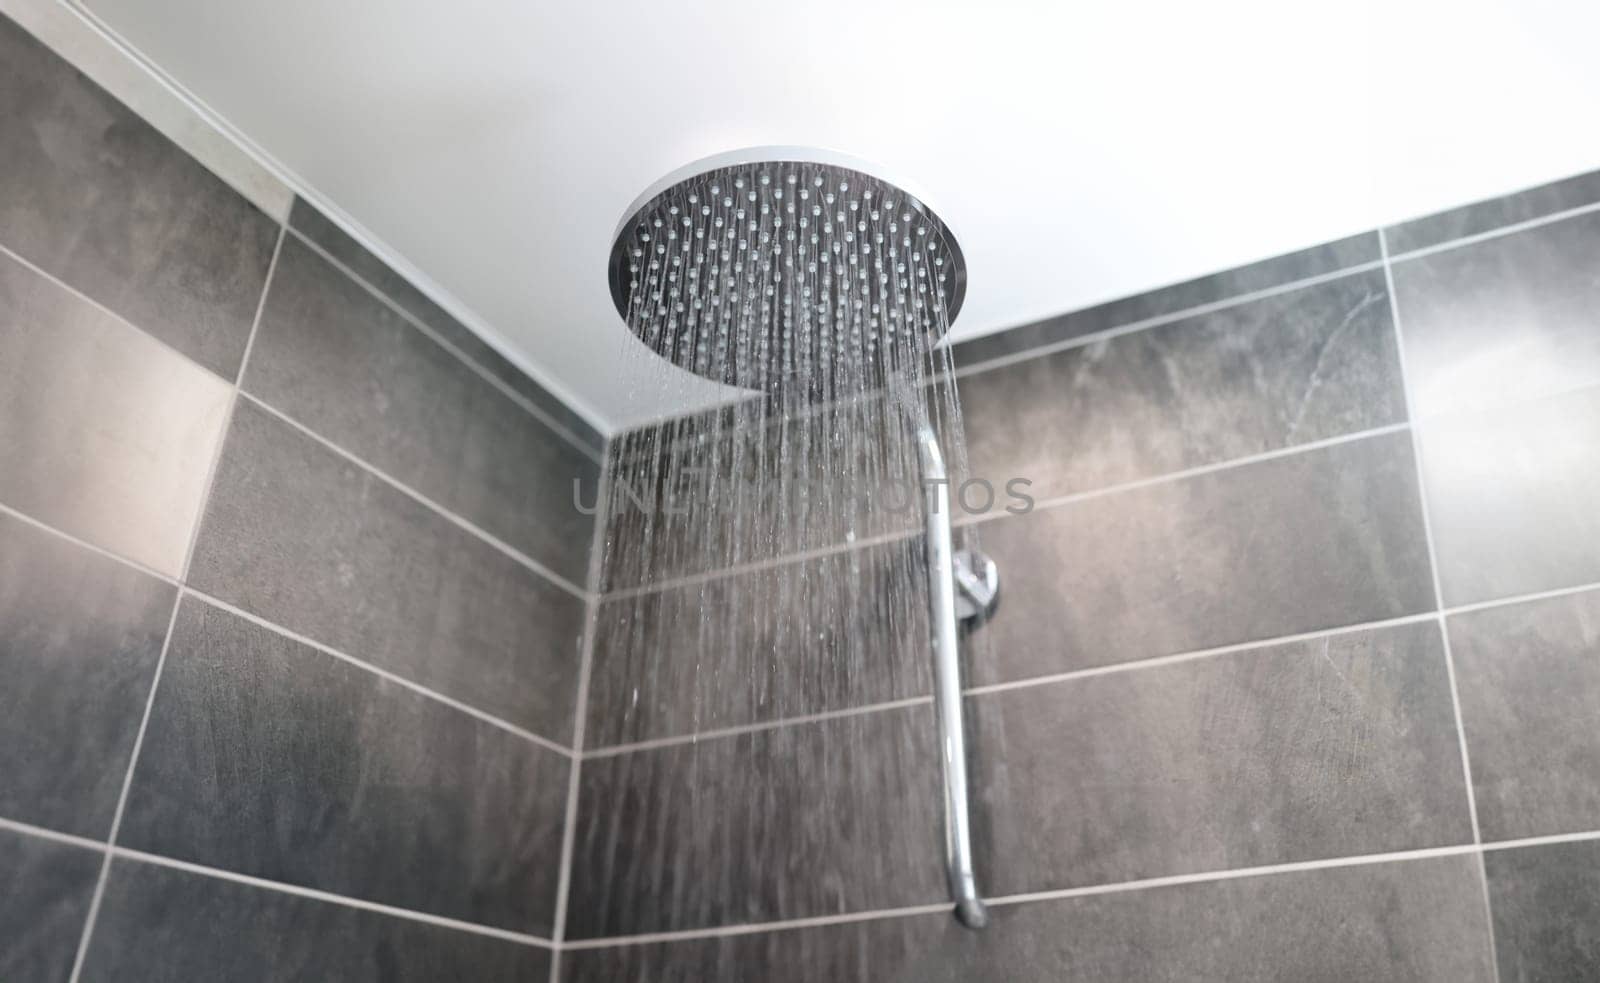 In bathroom, water flows from shower tap by kuprevich